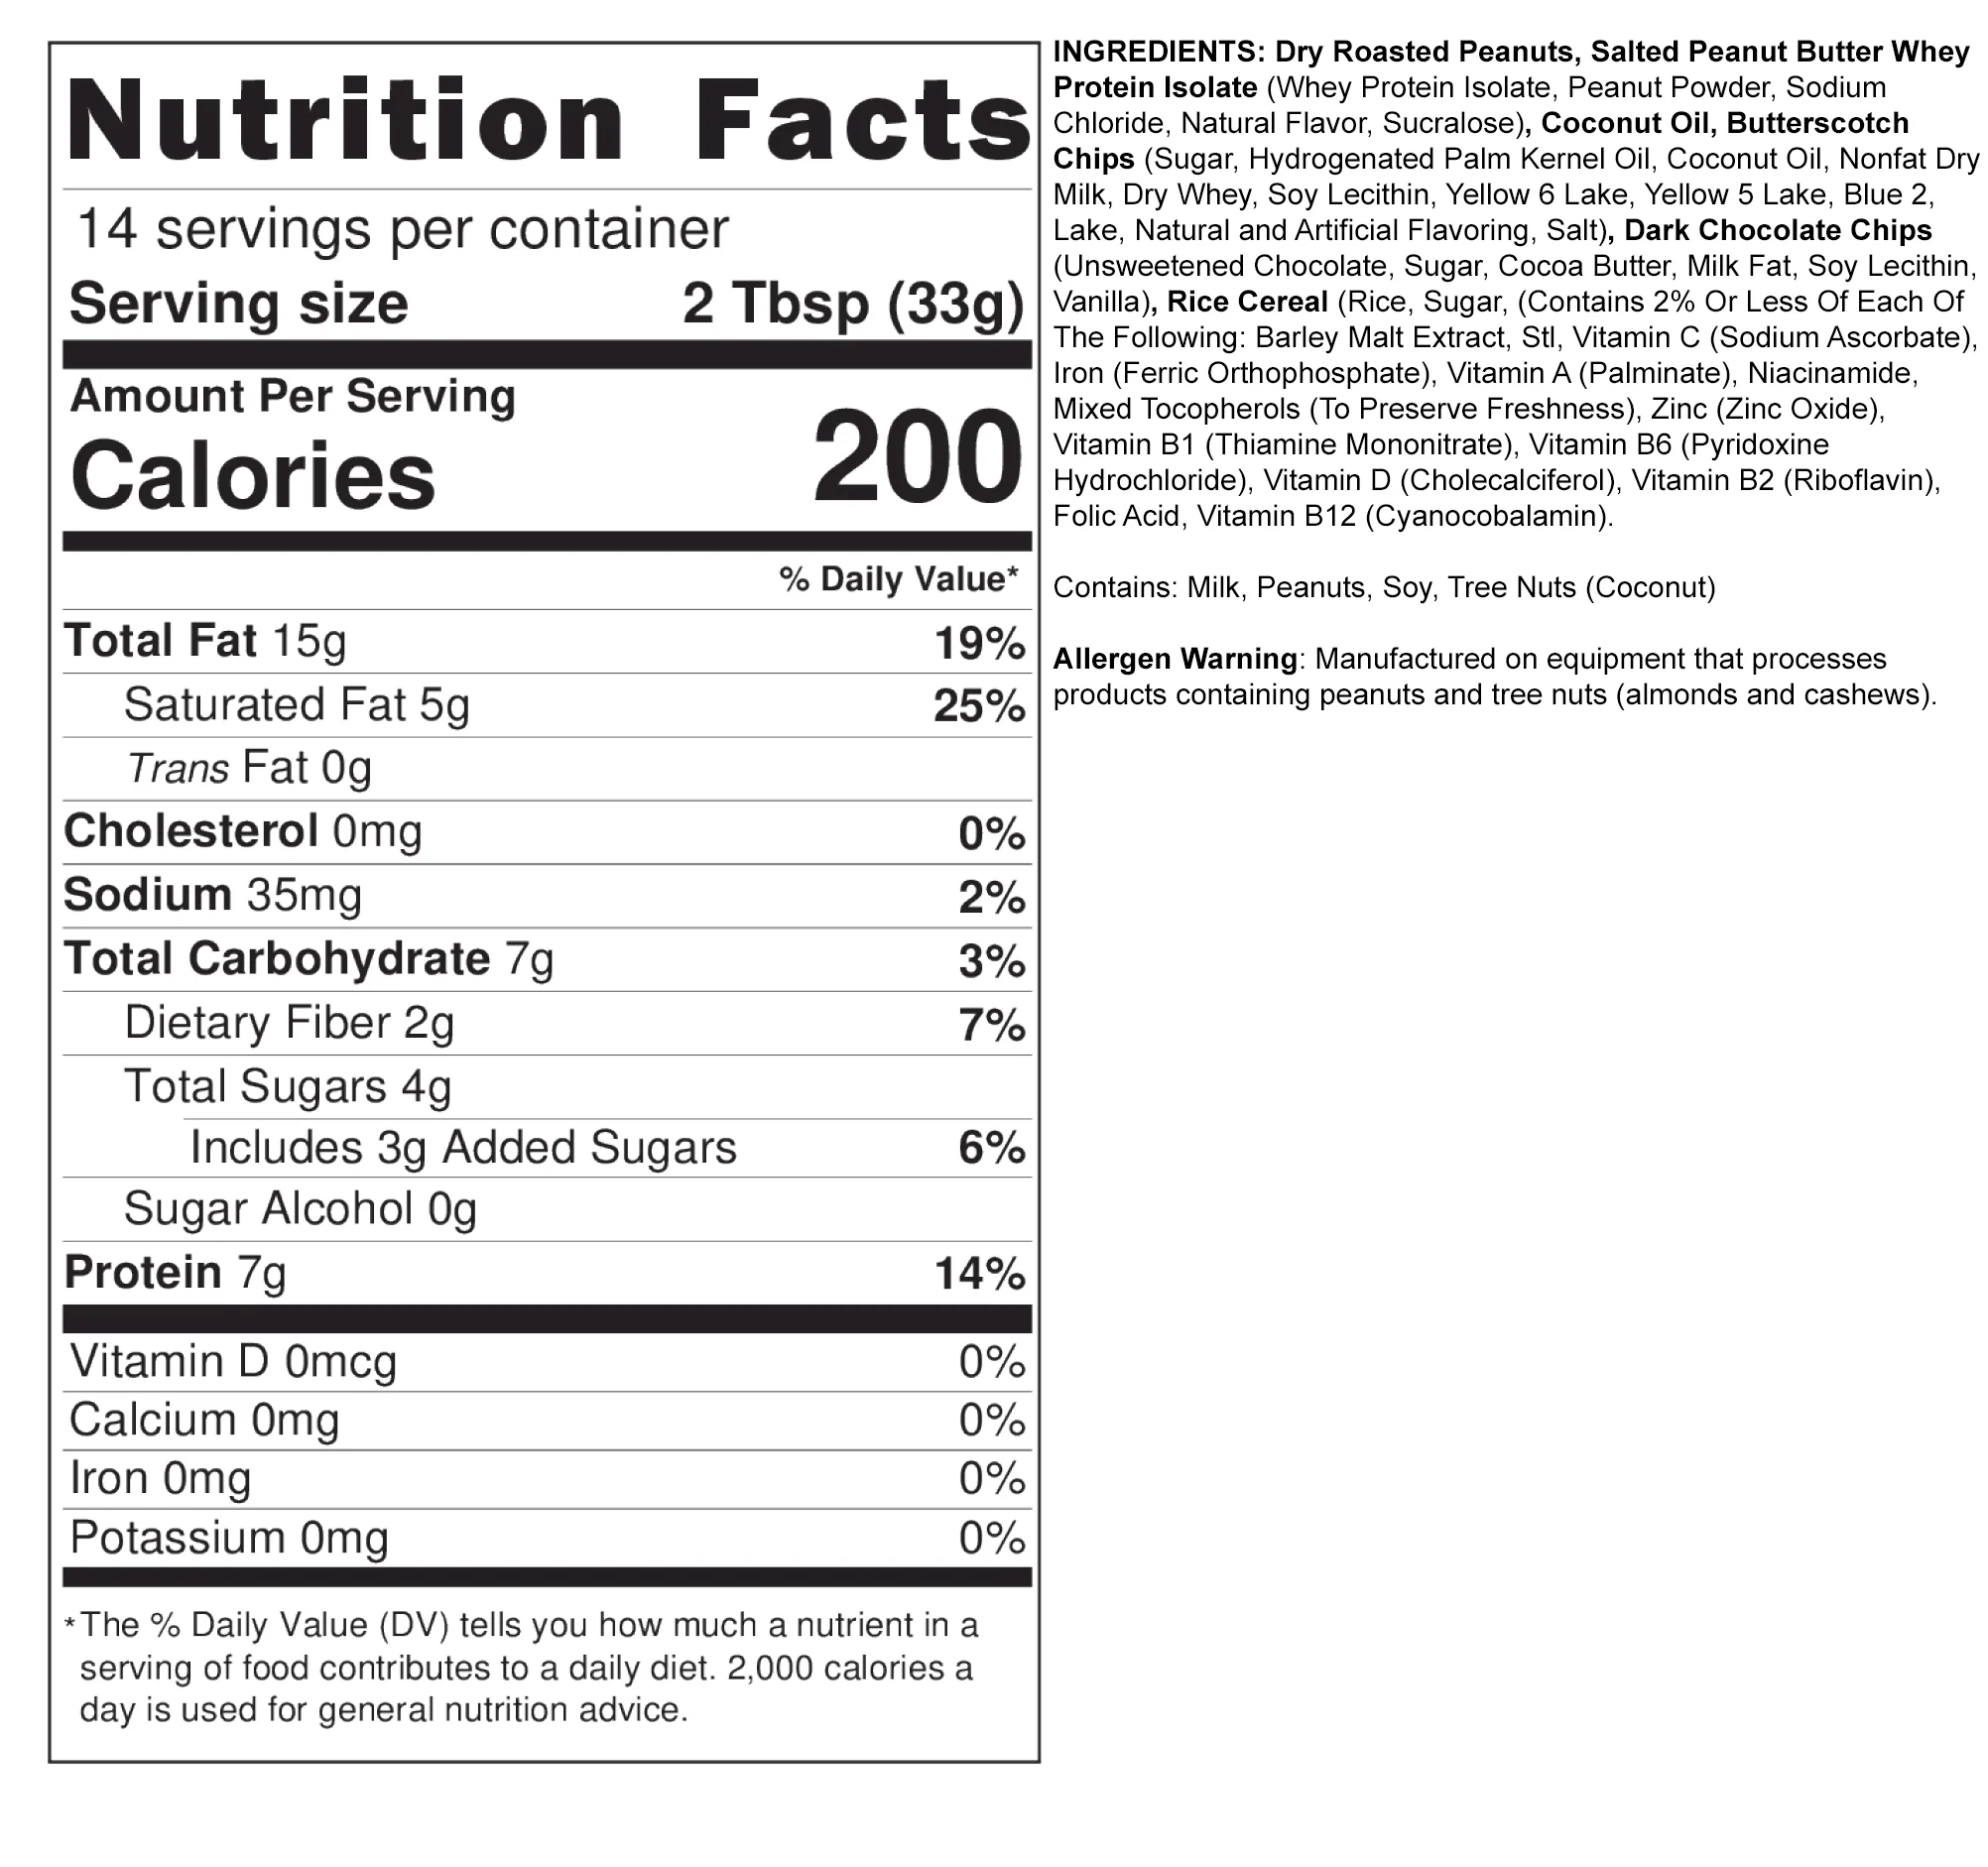 Nutrition facts for a snack with 14 servings. Each serving contains 15g fat, 7g carbs, and 7g protein. Made with peanuts, whey protein, and coconut oil.